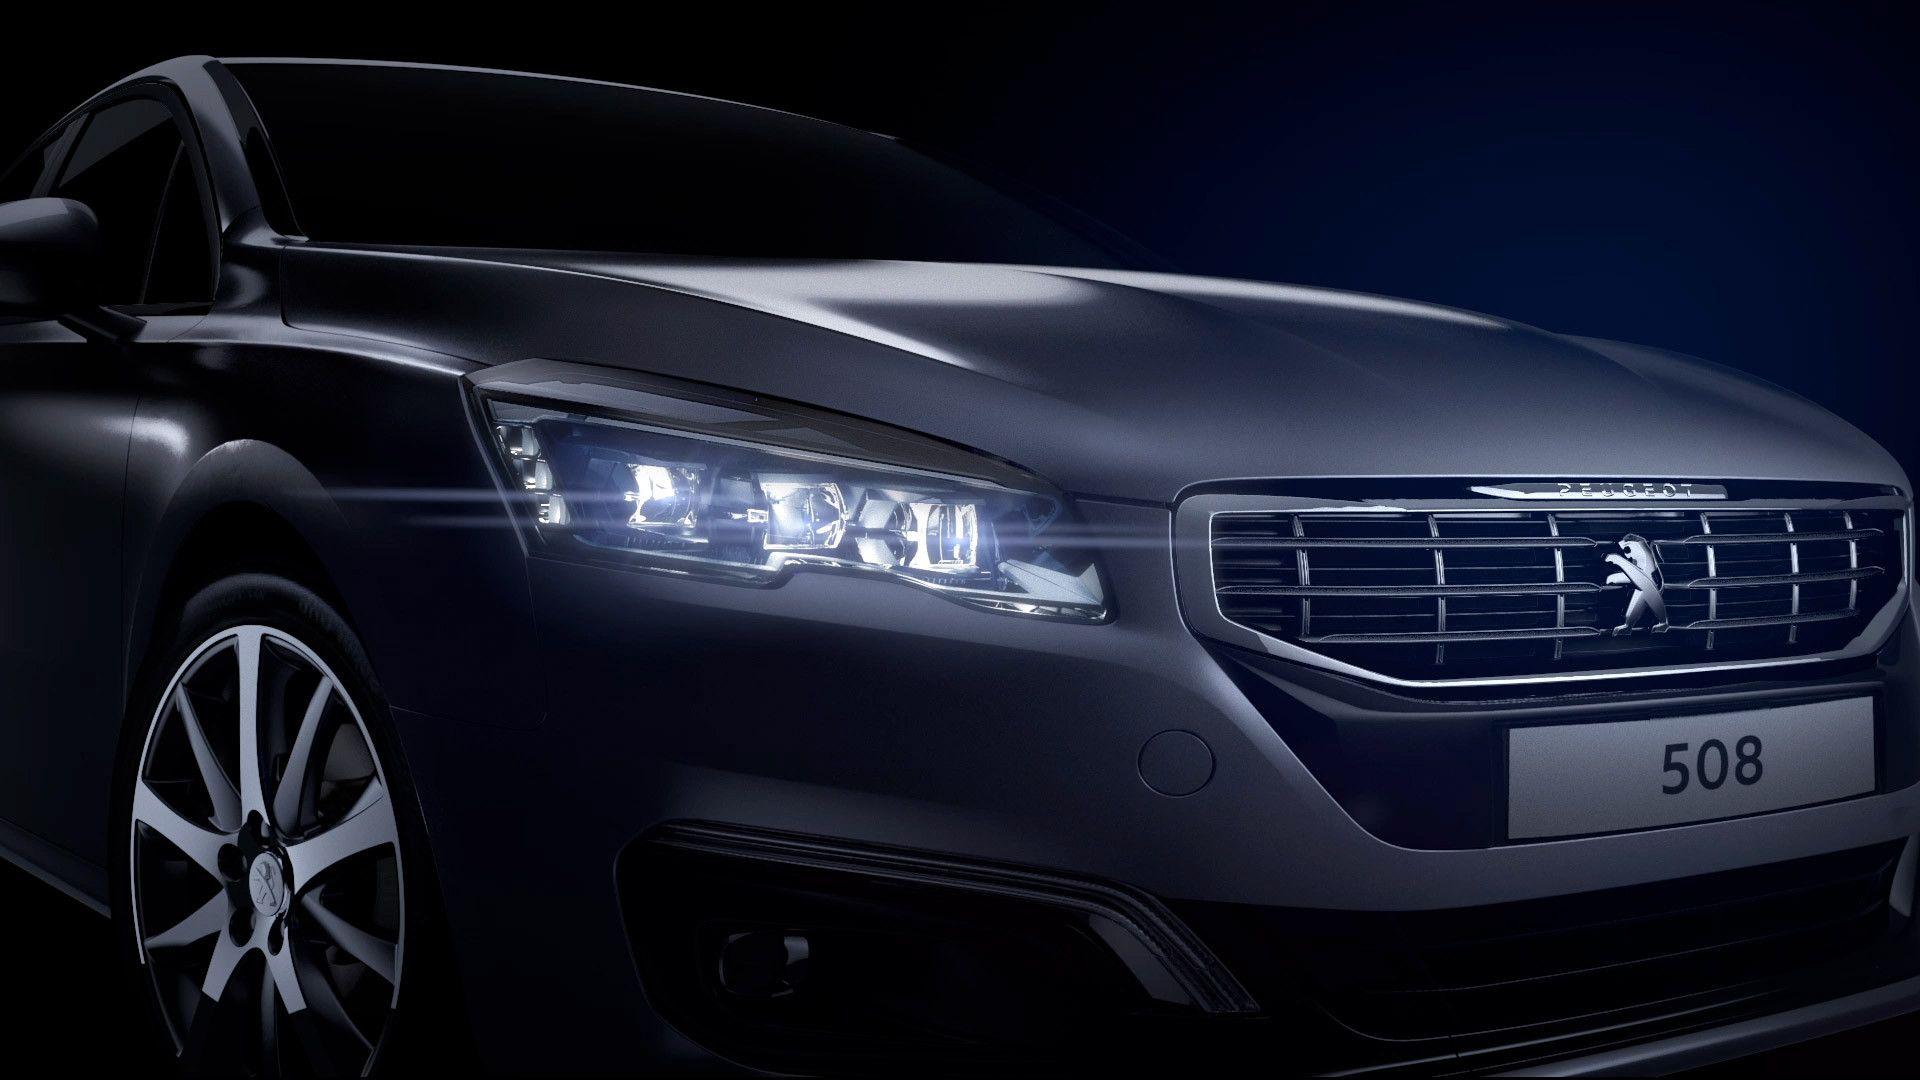 Gallery Peugeot 508. The comfortable family car dedicated to